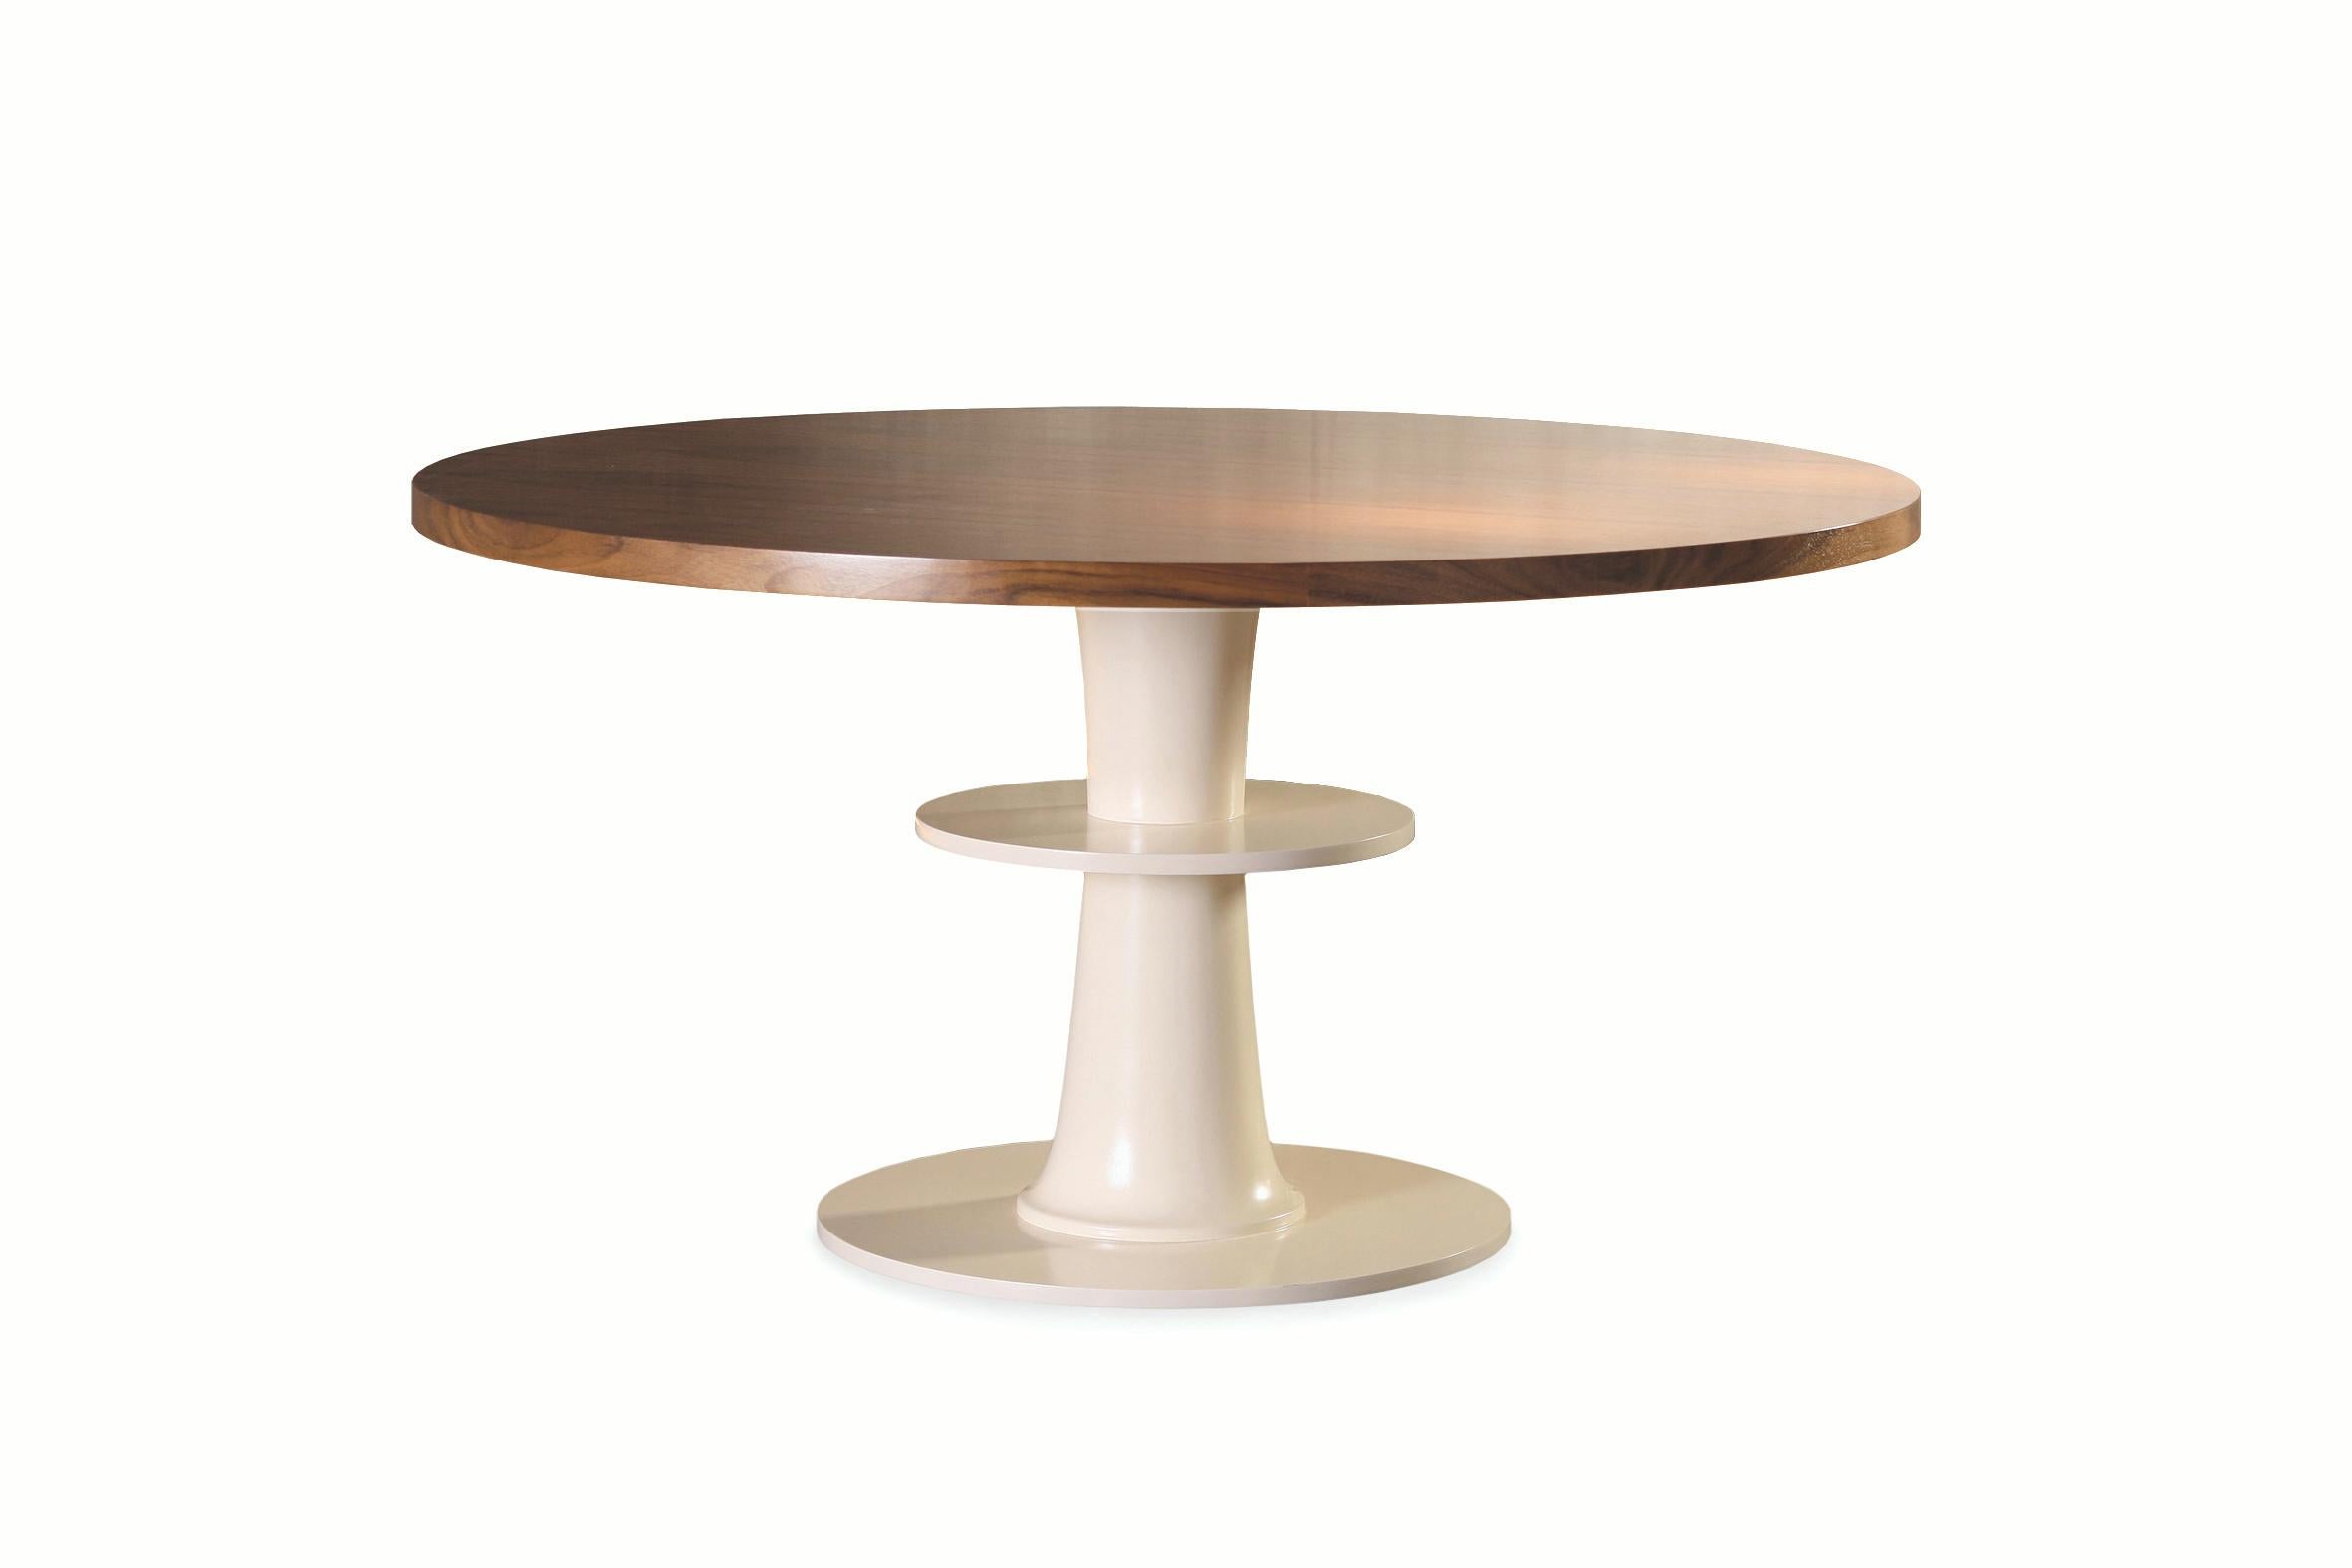 Circule dinner table is a practical and fun round table made of plywood, decape or lacquered mdf top and a lacquered mdf bottom, possible to customize in many colors. The middle part support allows the user to store a handbag or other items while